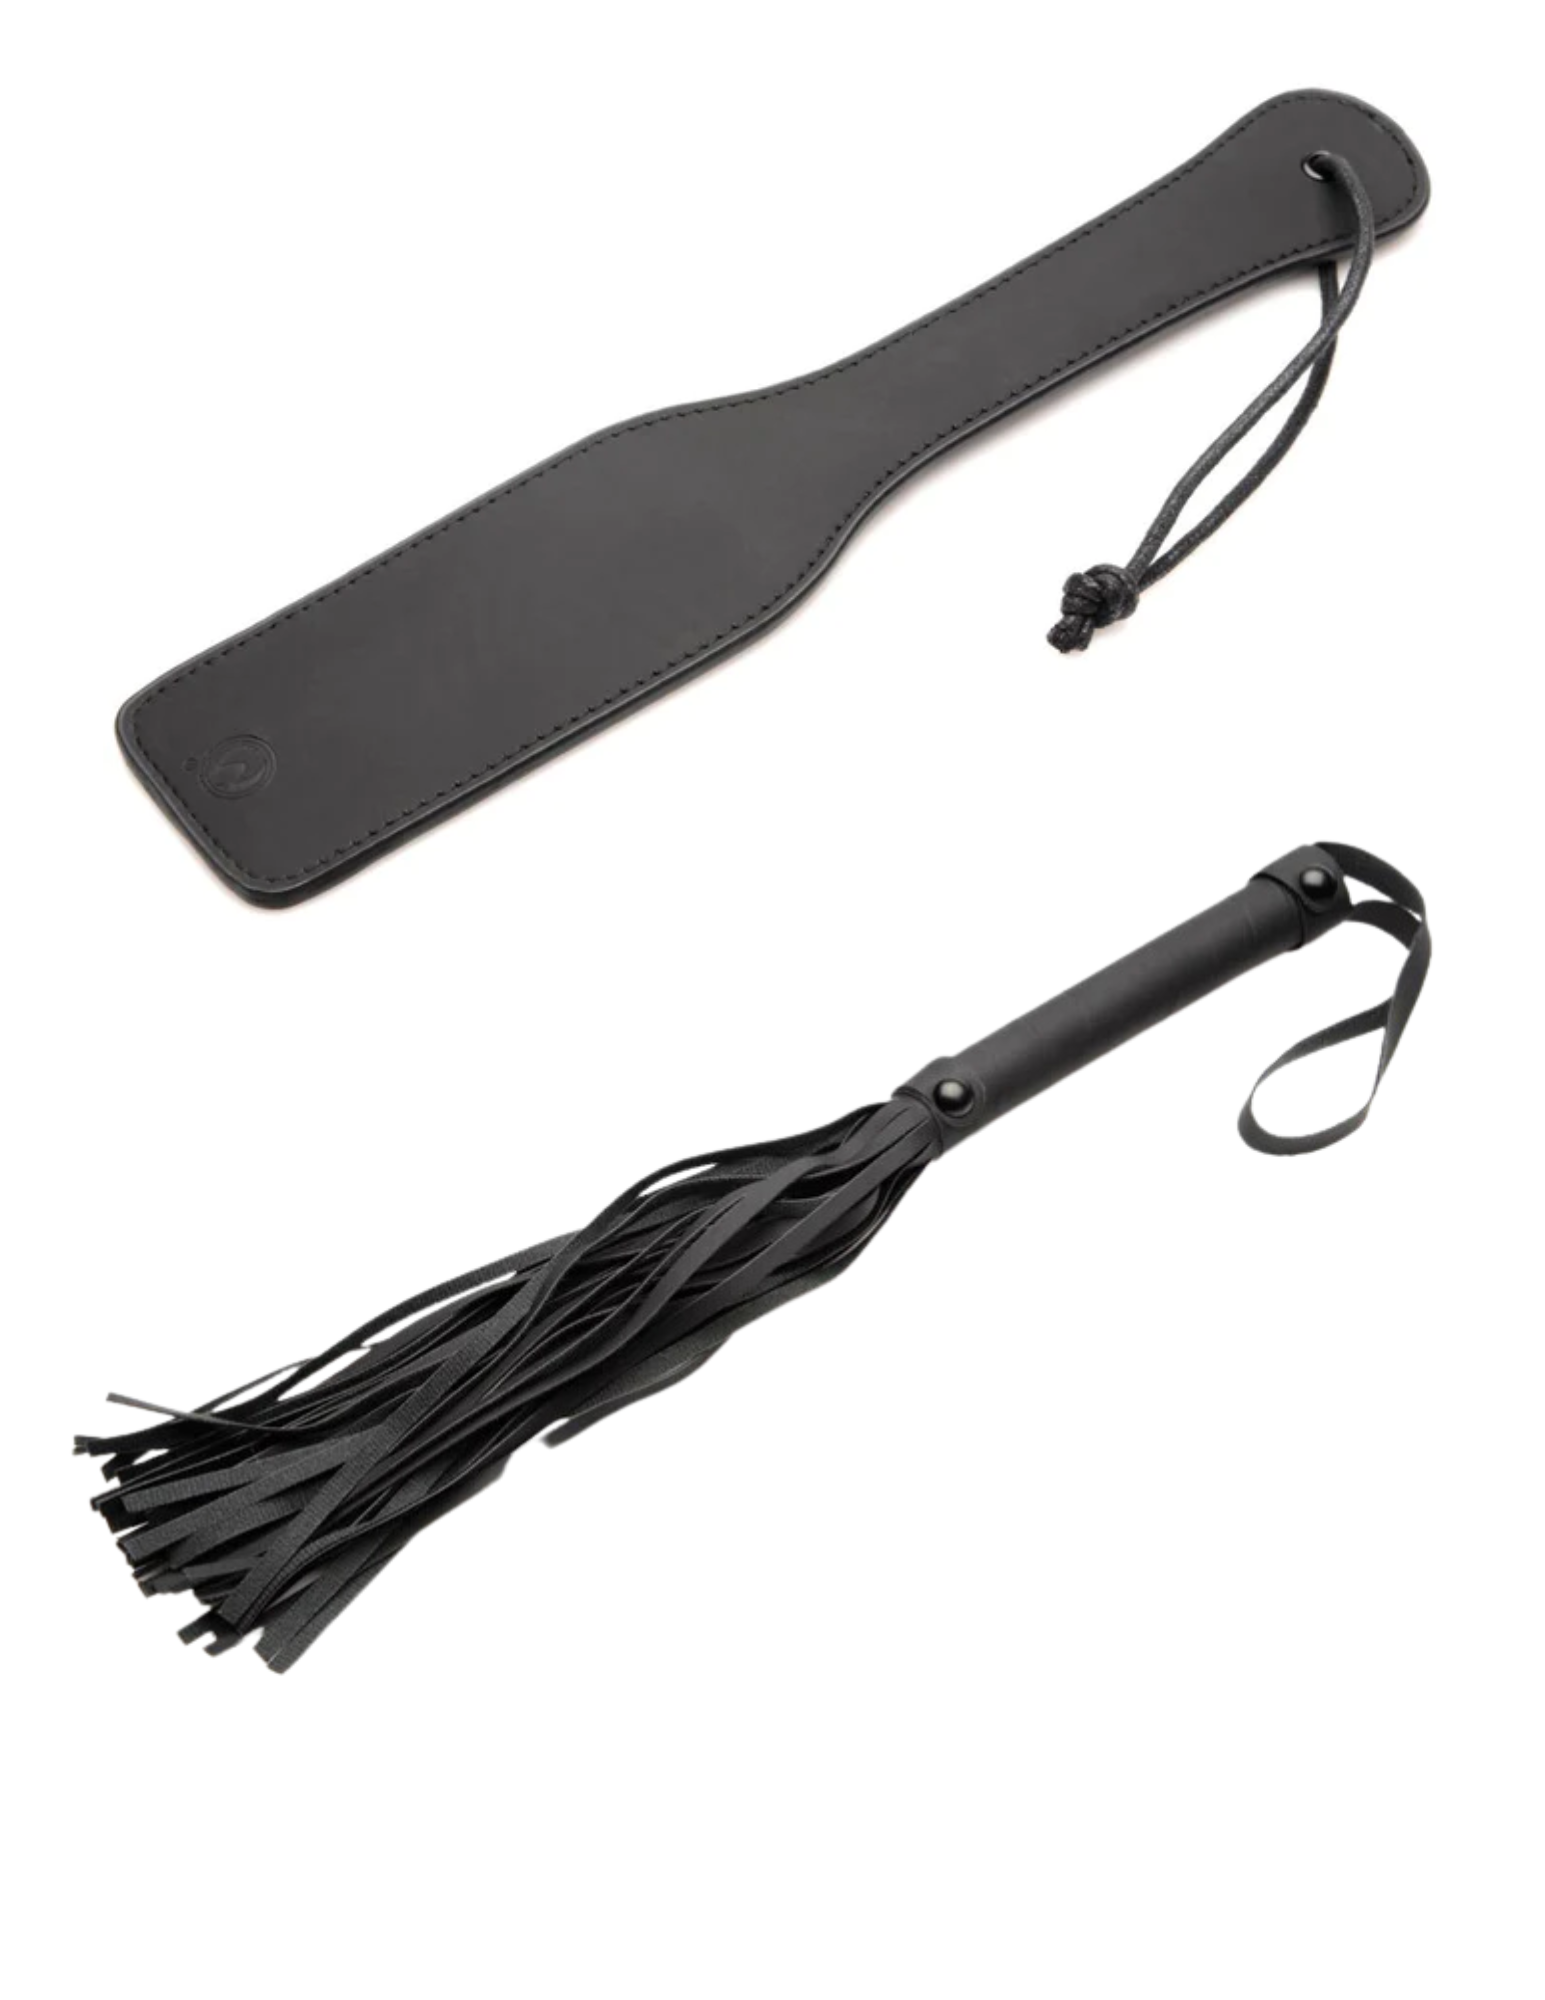 Image features the paddle and flogger from the Master of Kink PU Leather Deluxe Bondage Set by Master Series and XR Brands.